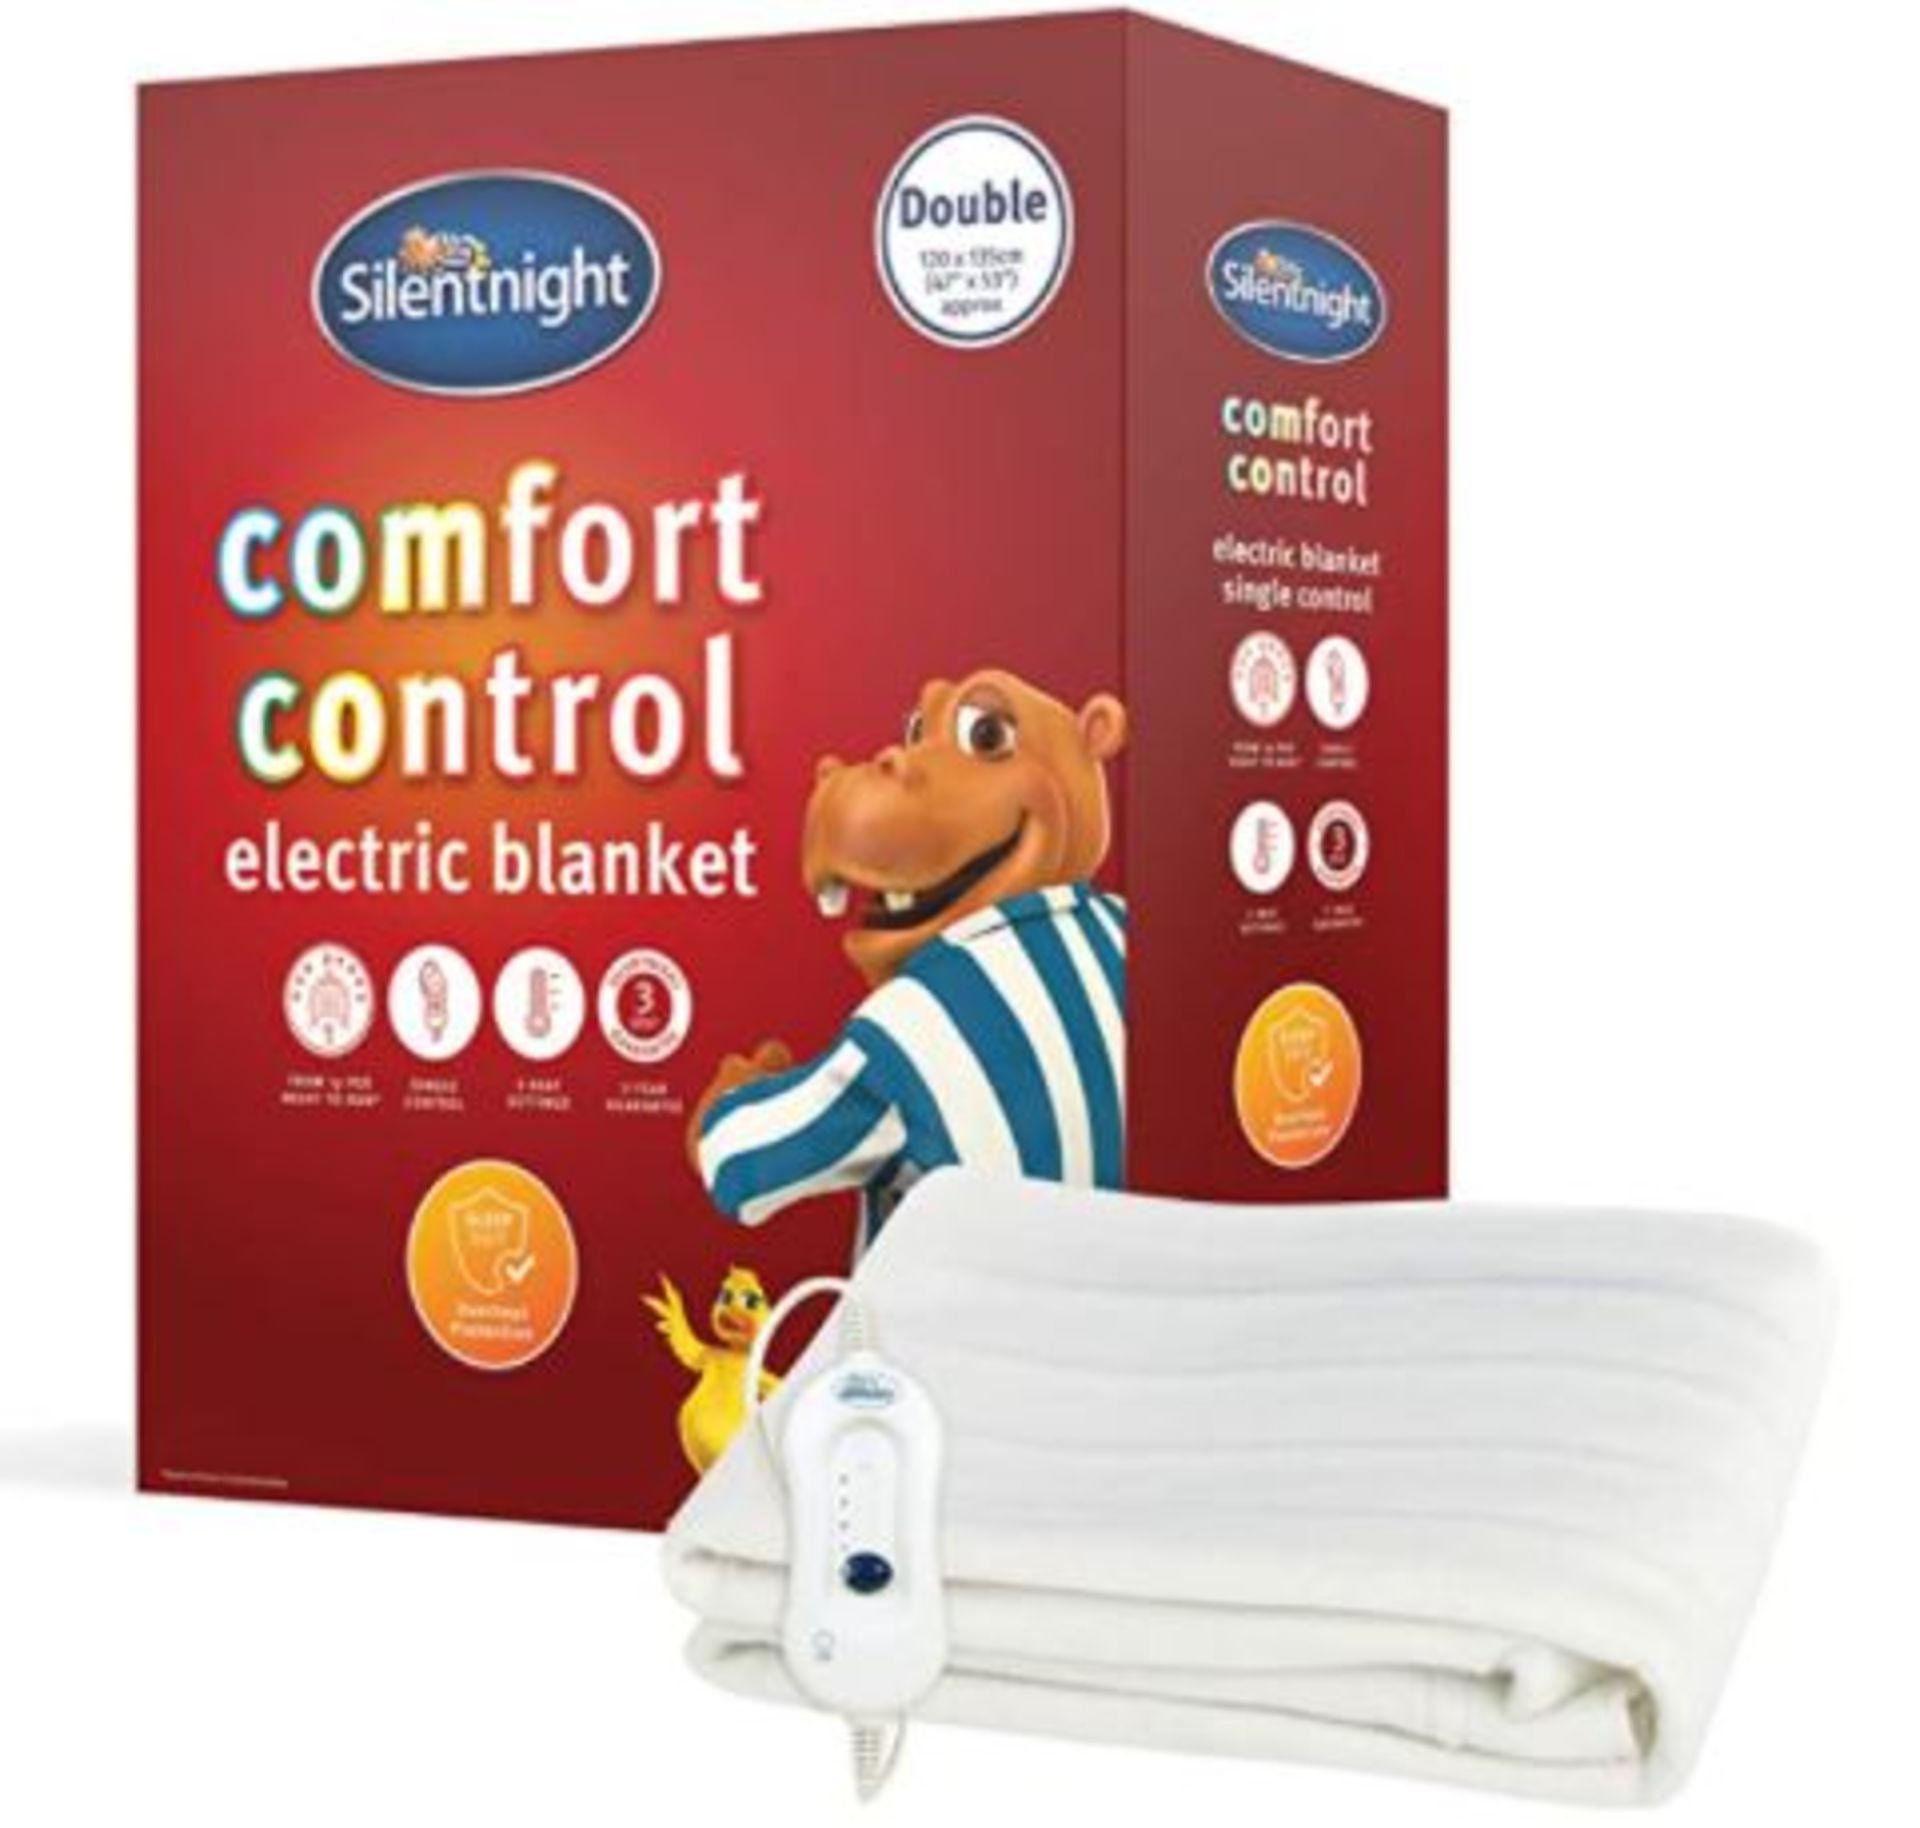 2 X Silentnight Double Comfort Control Electric Blanket. New, Sealed Product. No Guarantee Or W...